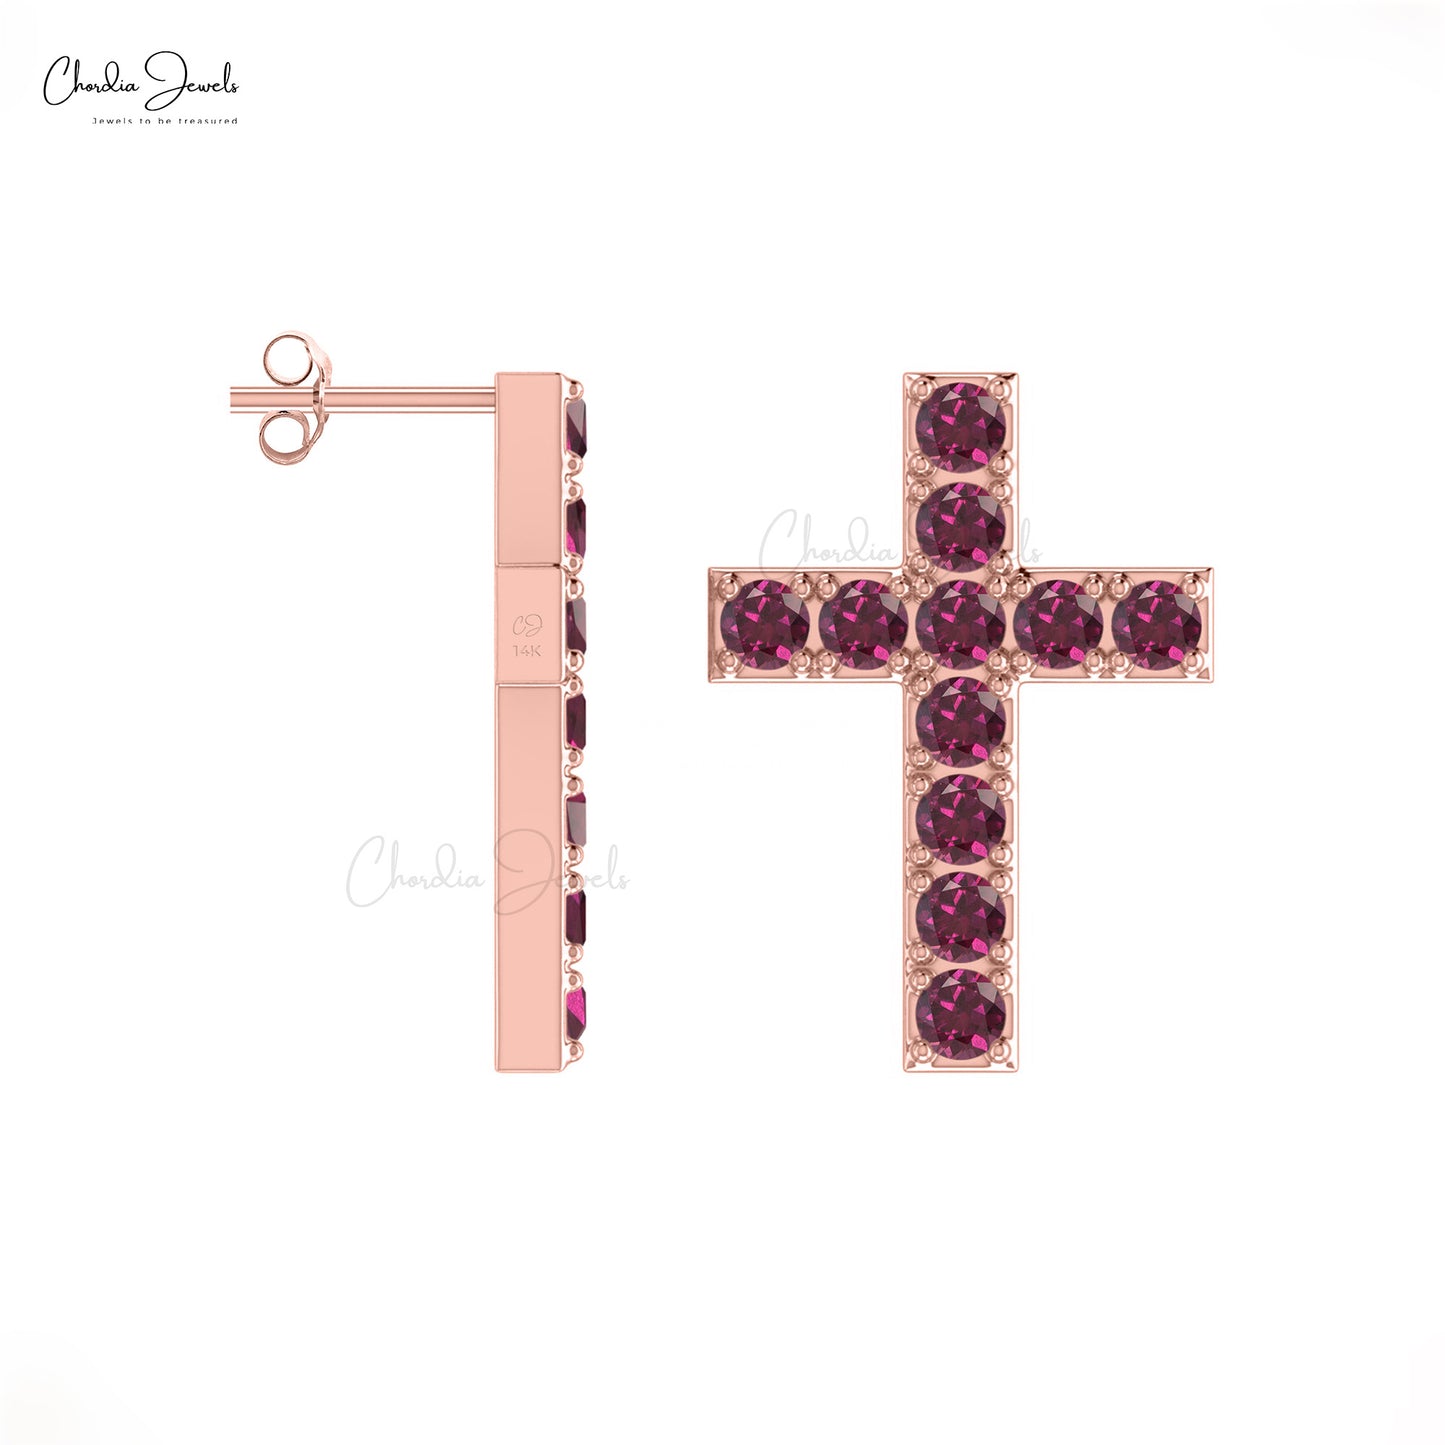 Round 2mm Cut 14k Solid Gold Pave Set Gemstone Religious Stud Earrings 1.10 Ct January Birthstone Genuine Rhodolite Garnet Cross Studs Jewelry For Gift